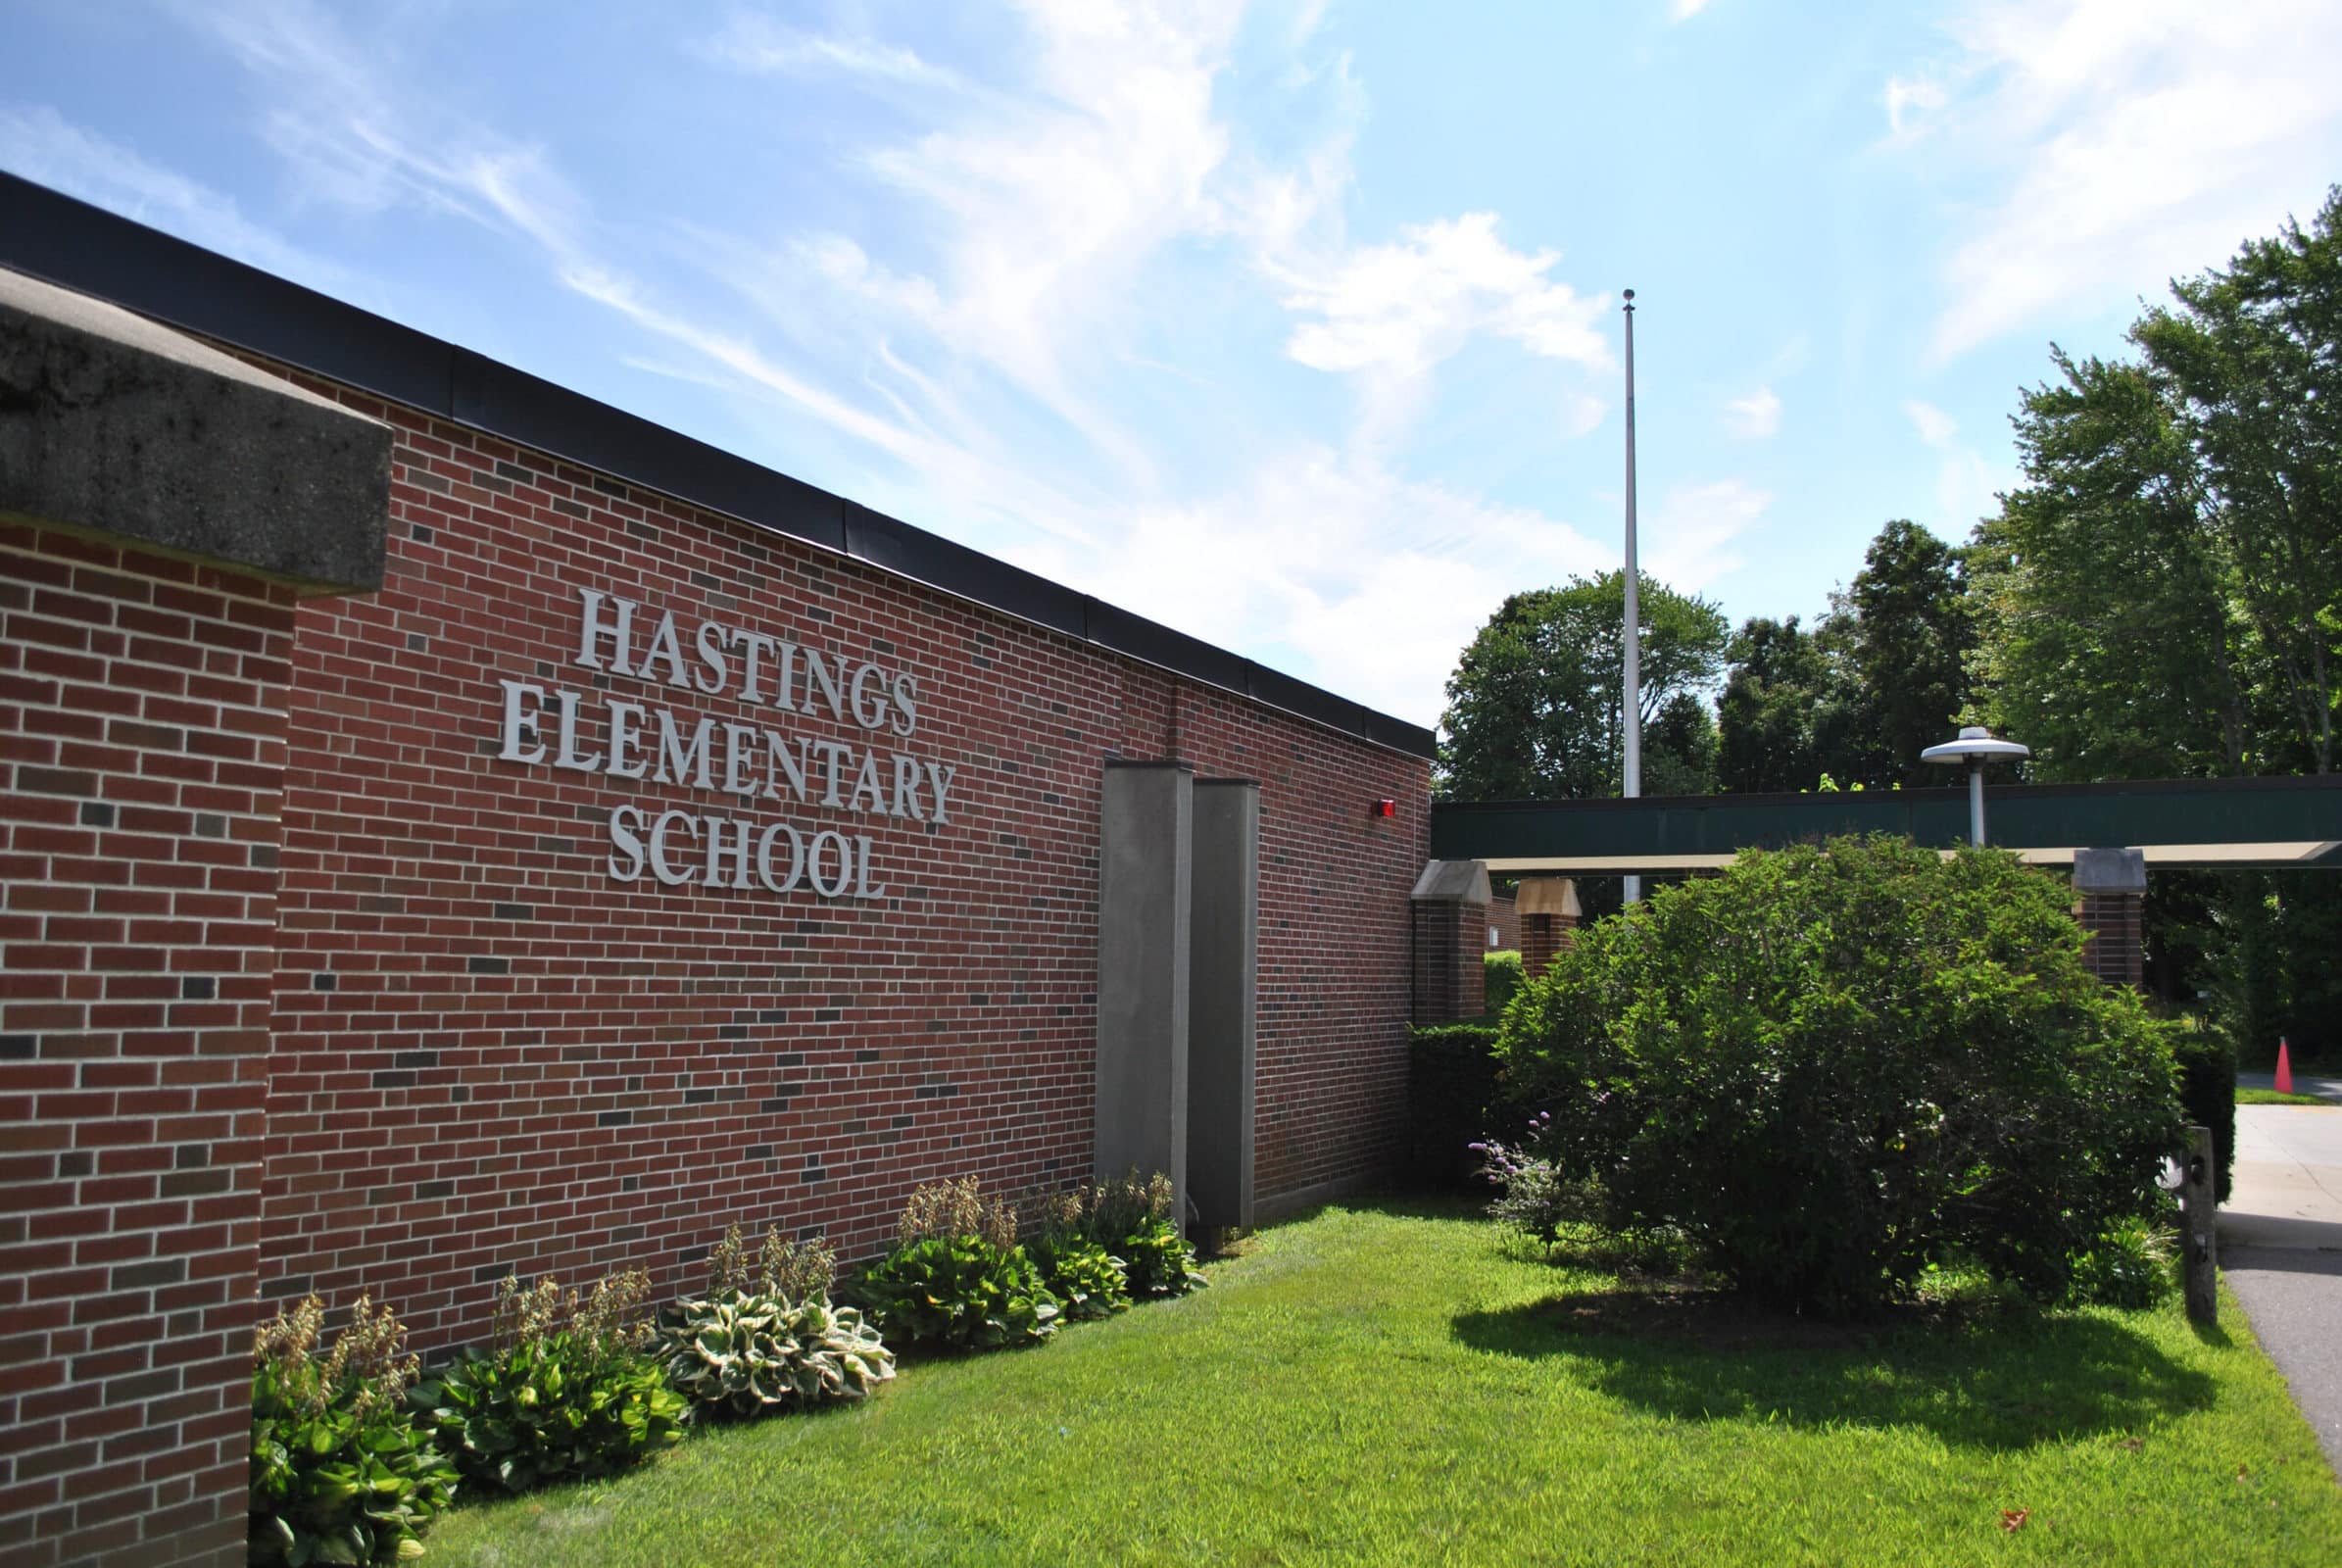 Hastings Elementary School is located off East Main St. in Westborough. Hastings students will wear masks when they return to school following a recent decision by the Westborough Board of Health.